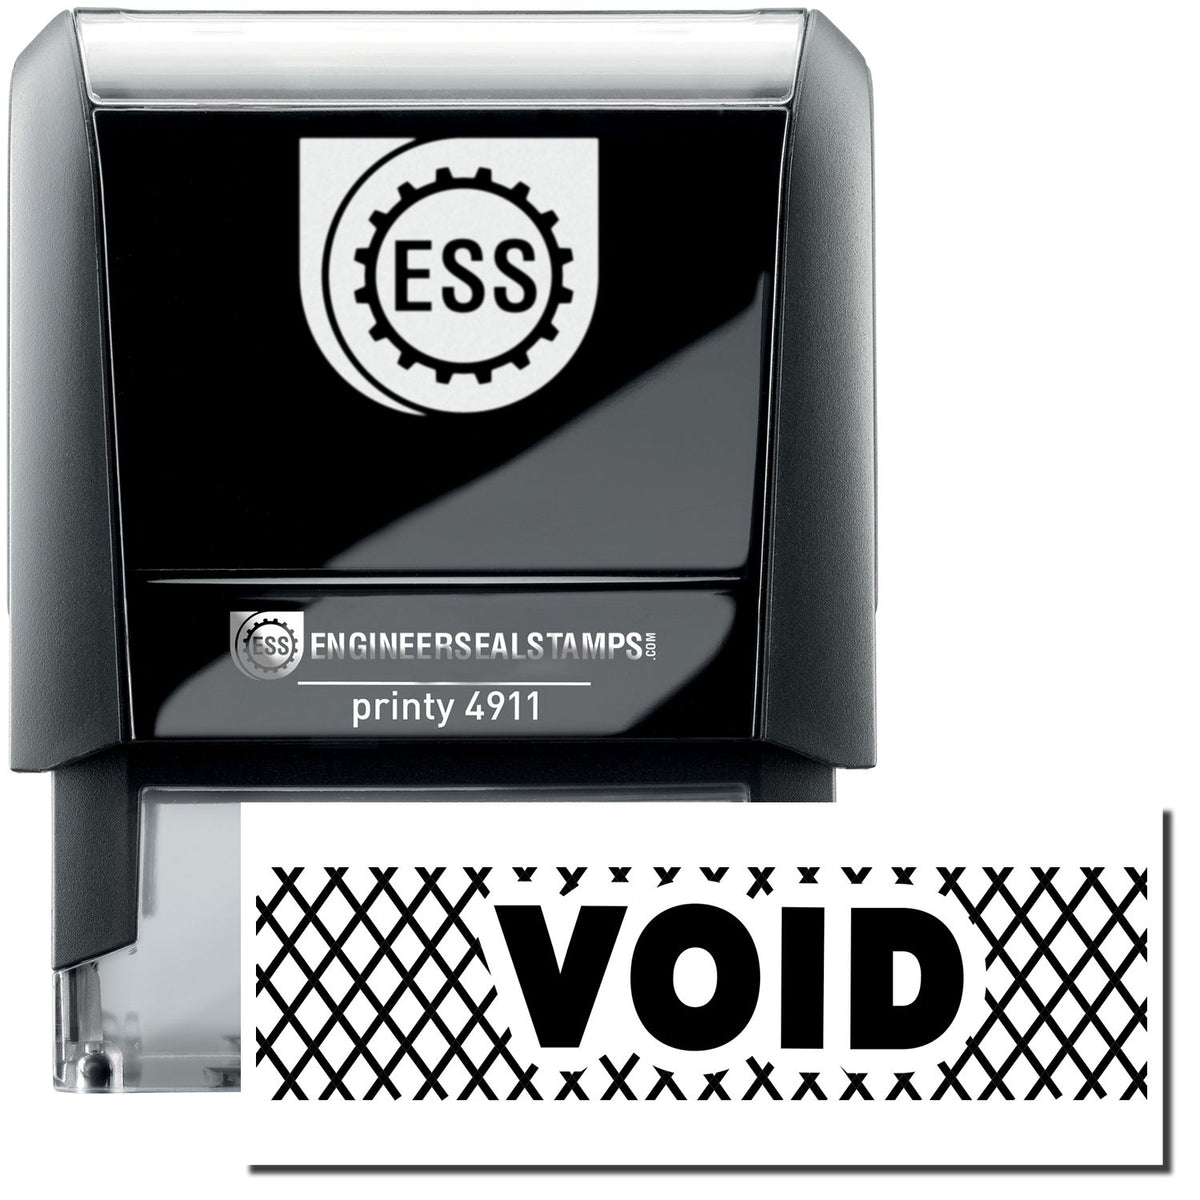 A self-inking stamp with a stamped image showing how the text &quot;VOID&quot; with strikelines around it is displayed after stamping.